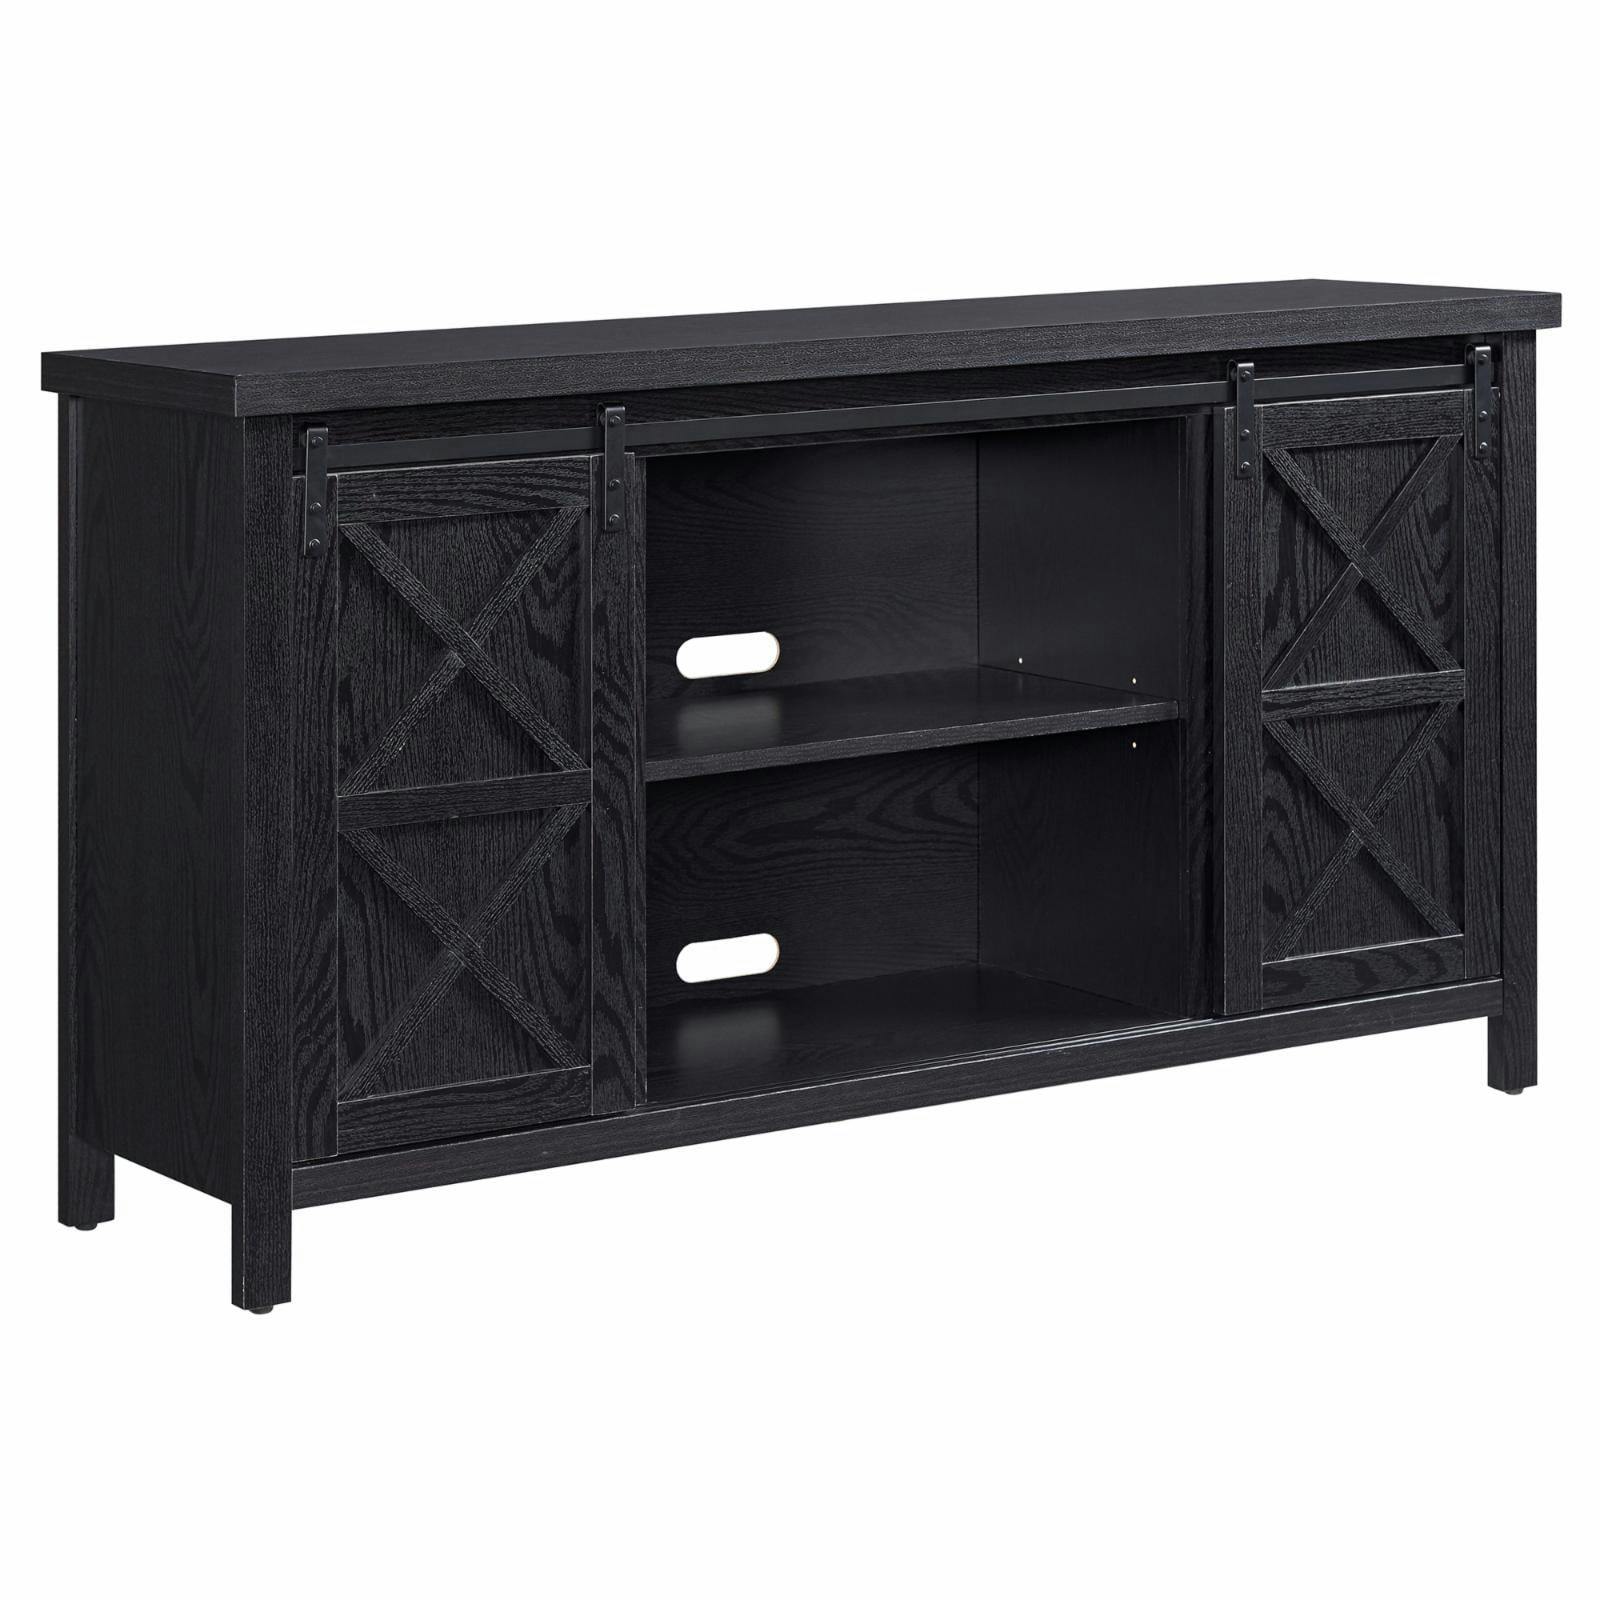 Elmwood Modern Farmhouse 58" TV Stand with Cabinet in Black Grain